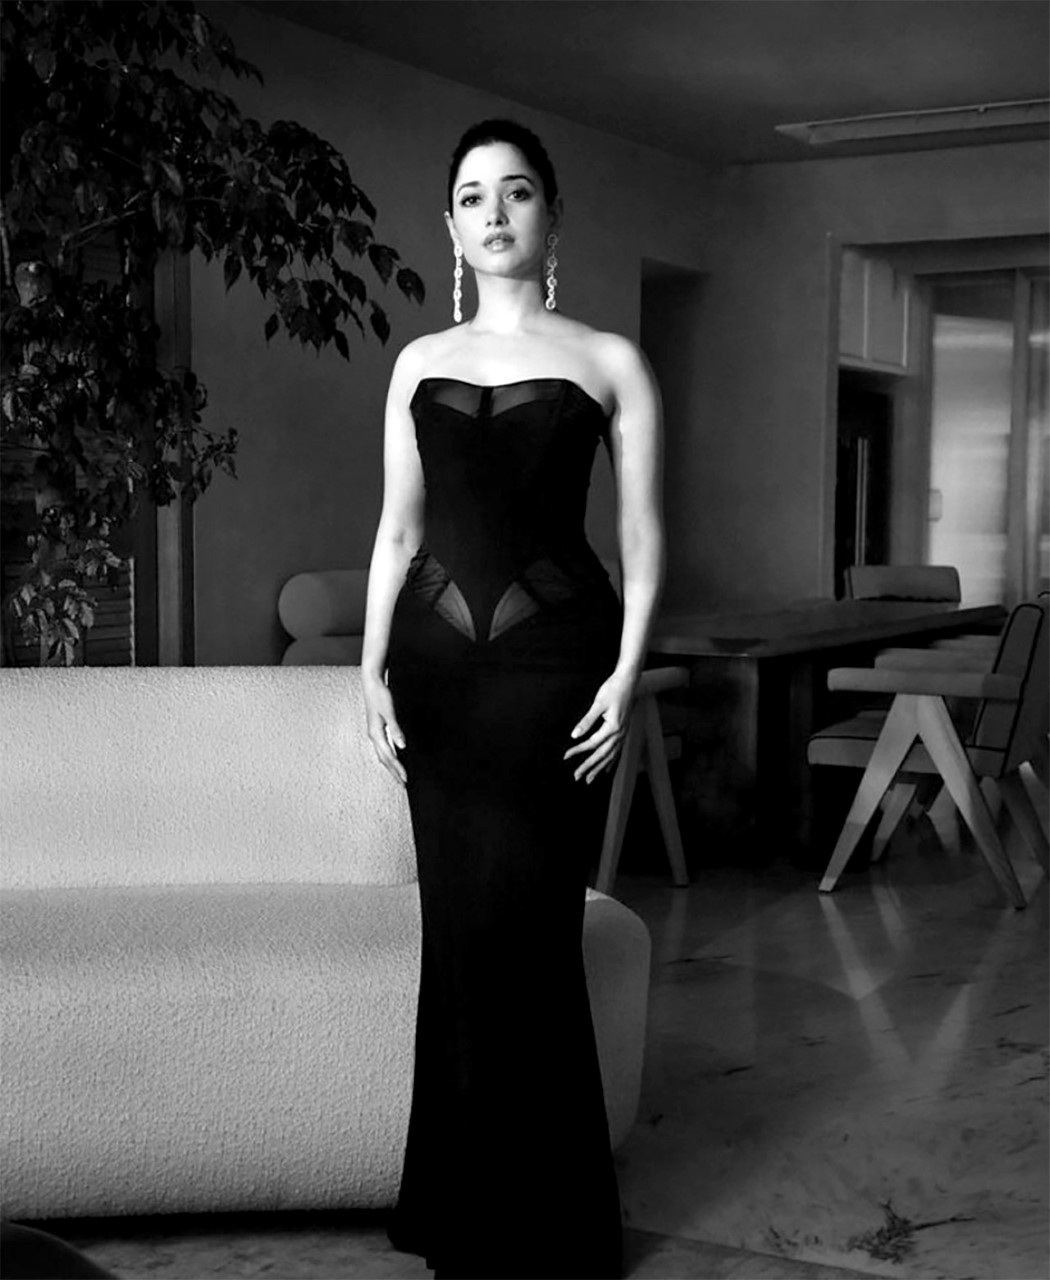 Tamannaah Bhatia sets the red carpet on fire, exuding fierce elegance in her black corset gown by Mugler and H&M